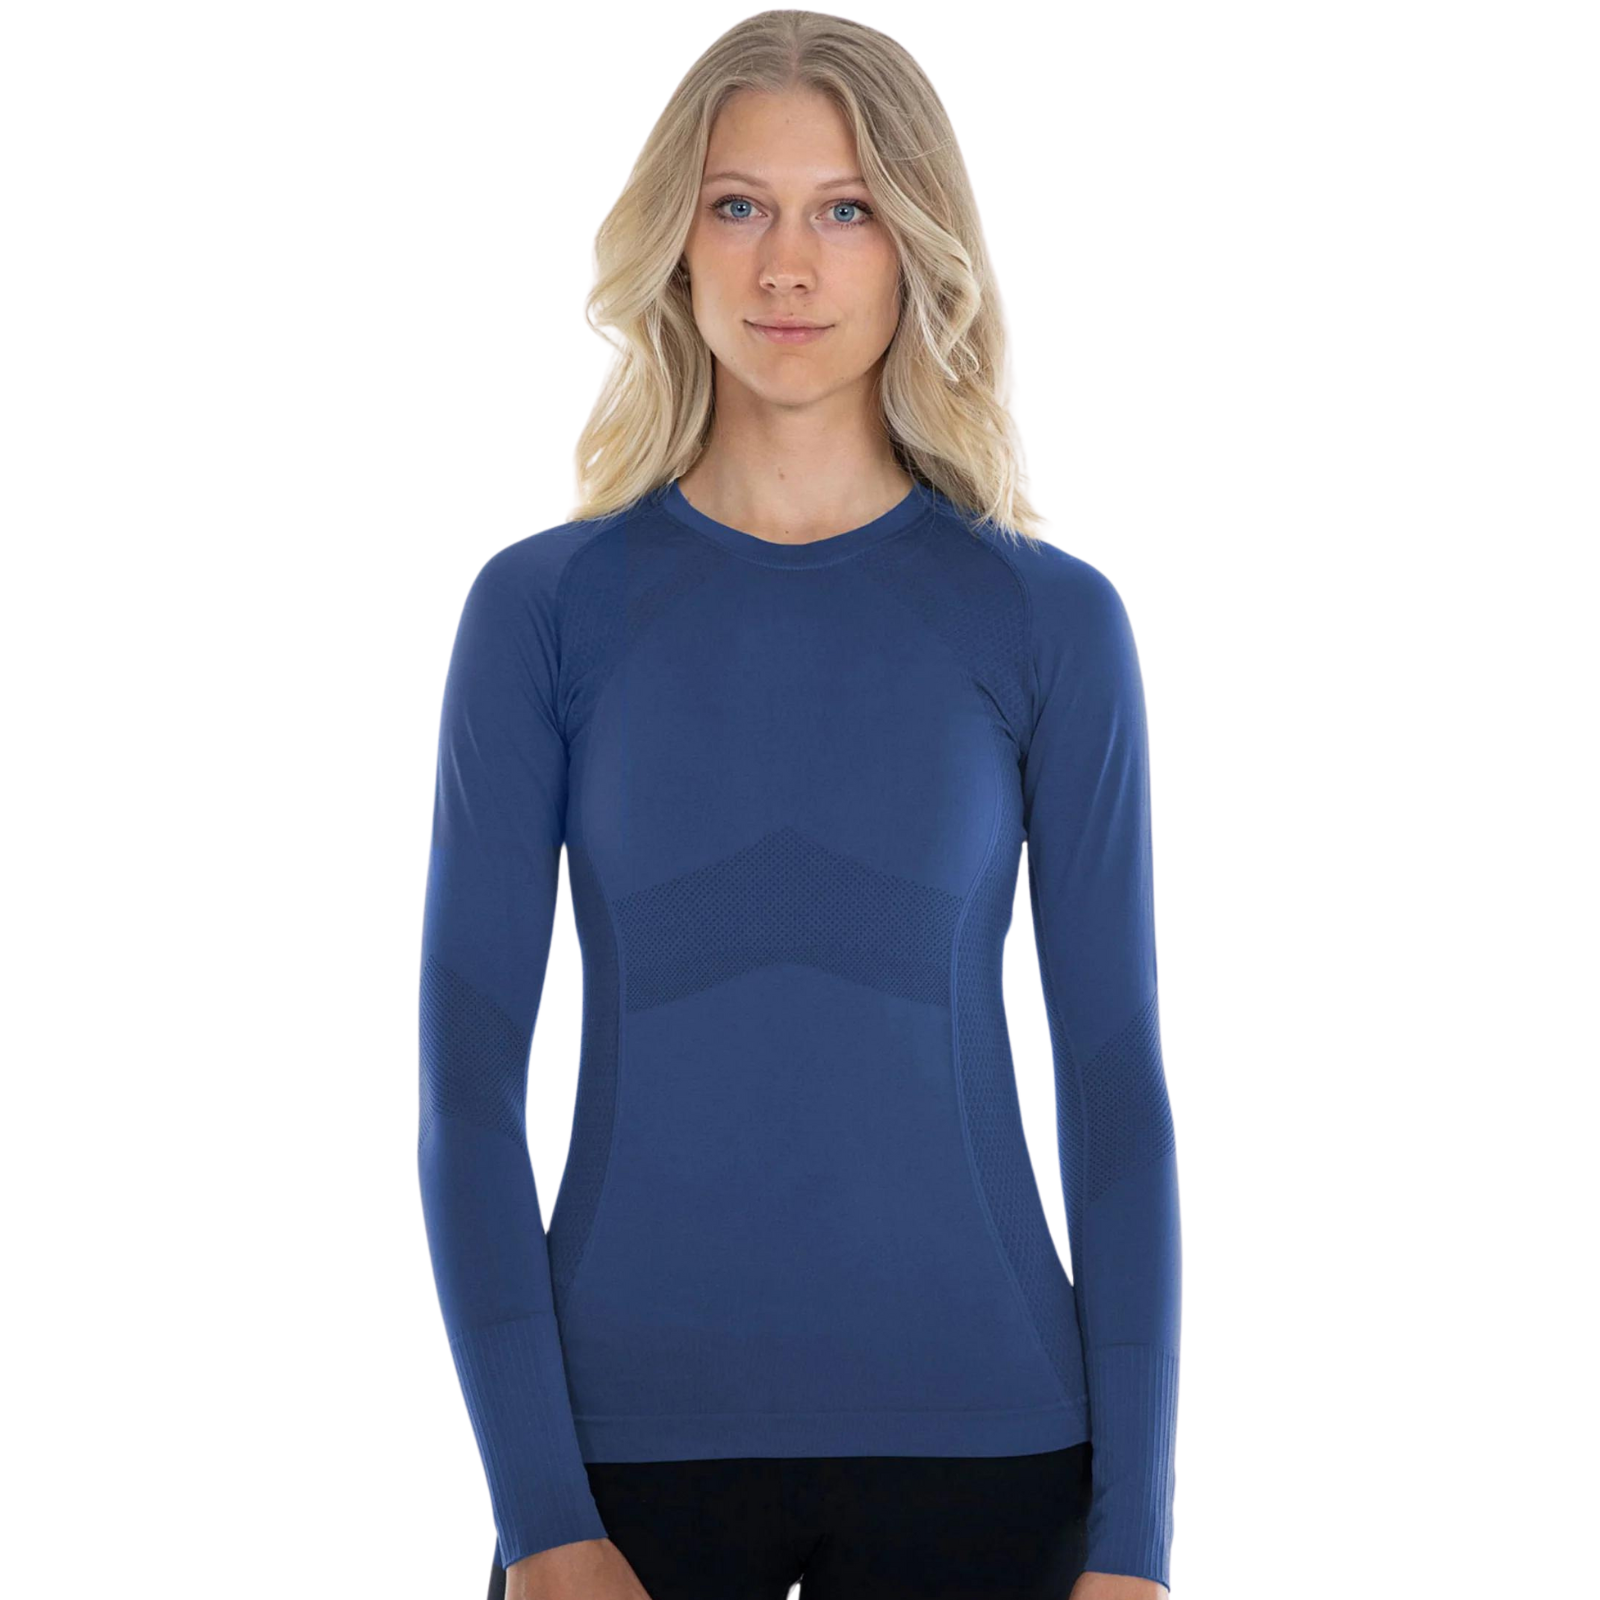 Anique Long Sleeve Crew Shirt in Blueberry - Women&#39;s XS (0-2)